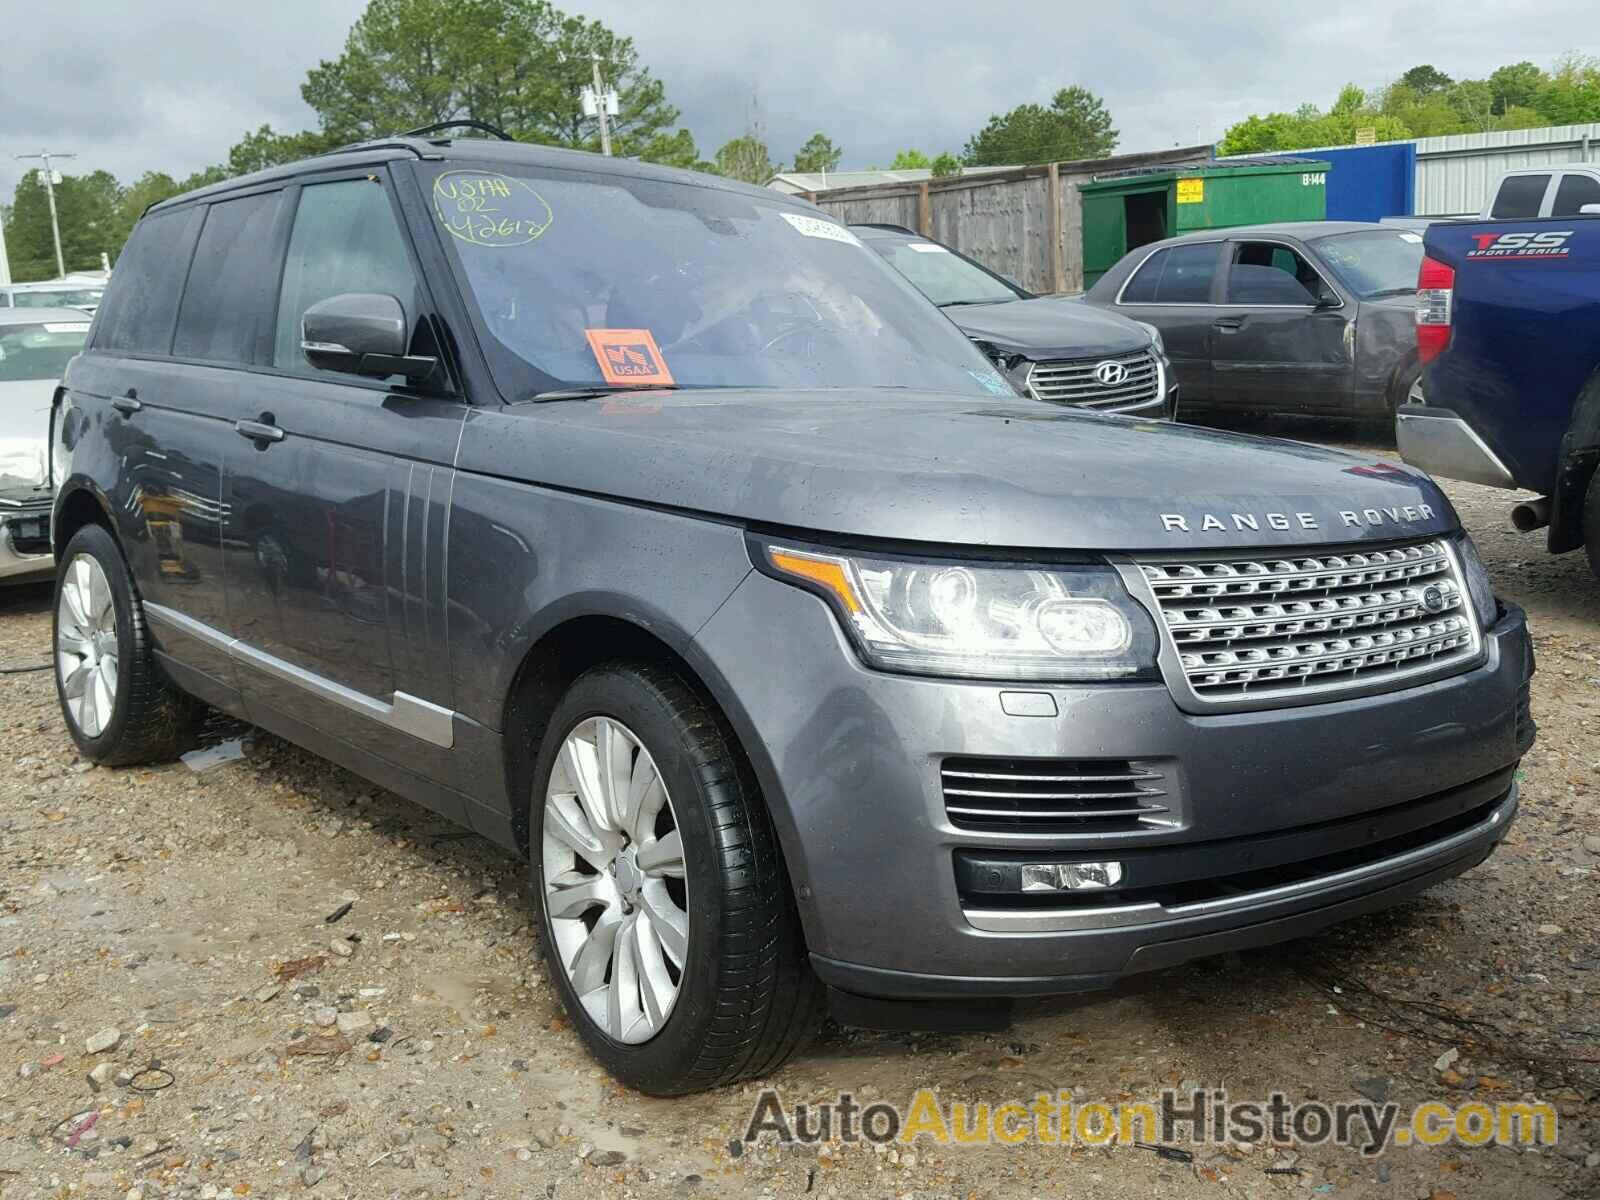 2016 LAND ROVER RANGE ROVER SUPERCHARGED, SALGS2EF3GA263758